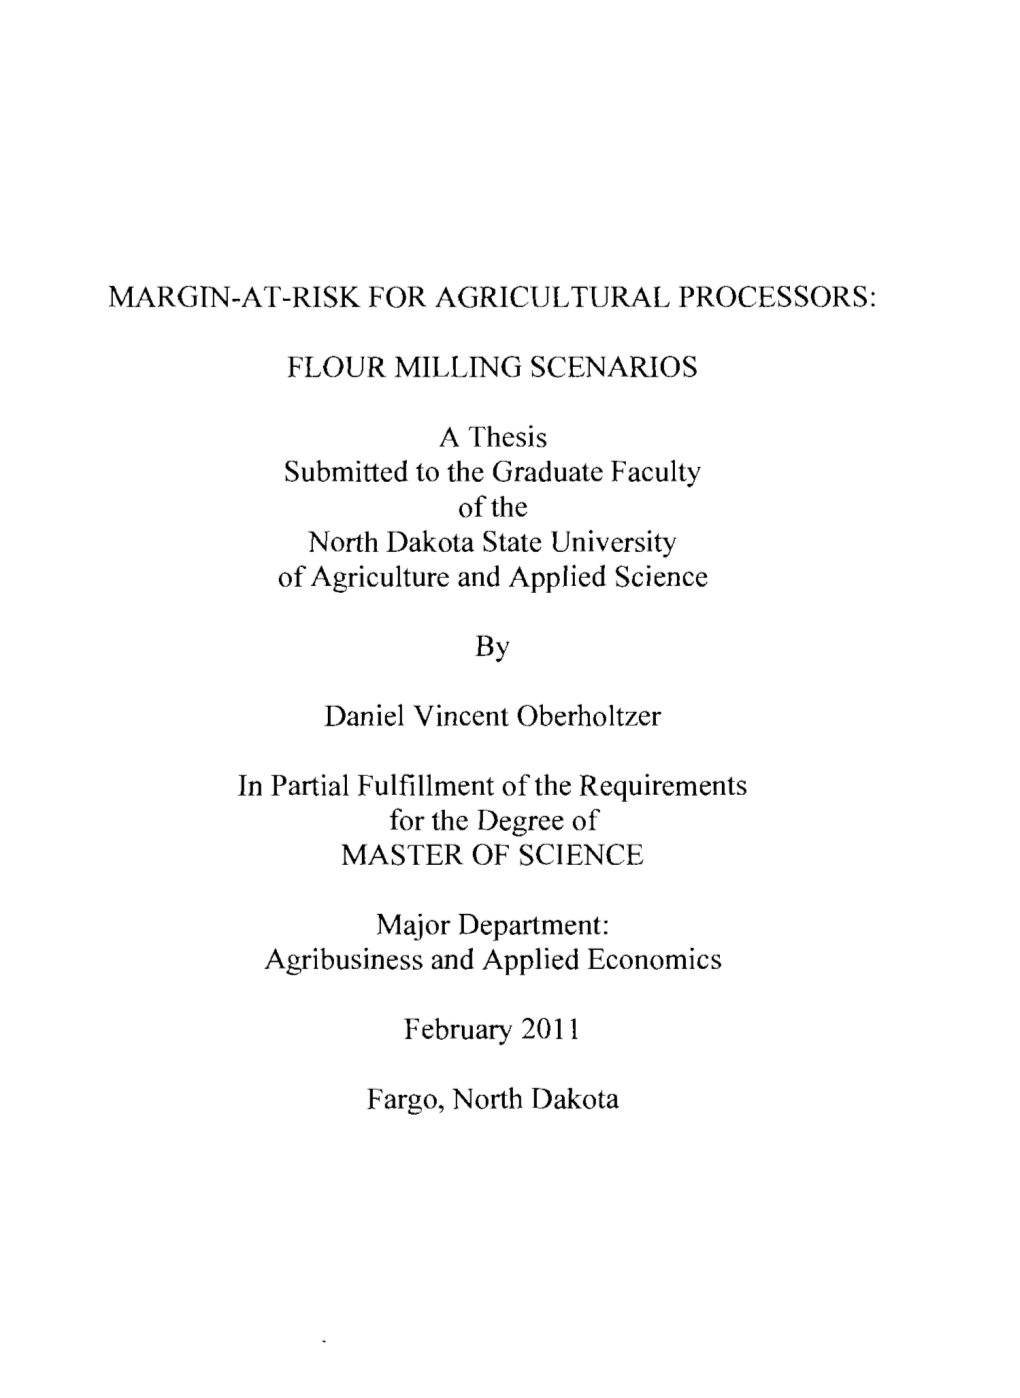 MARGIN-AT-RISK for AGRICULTURAL PROCESSORS: FLOUR MILLING SCENARIOS a Thesis Submitted to the Graduate Faculty of the North Dako